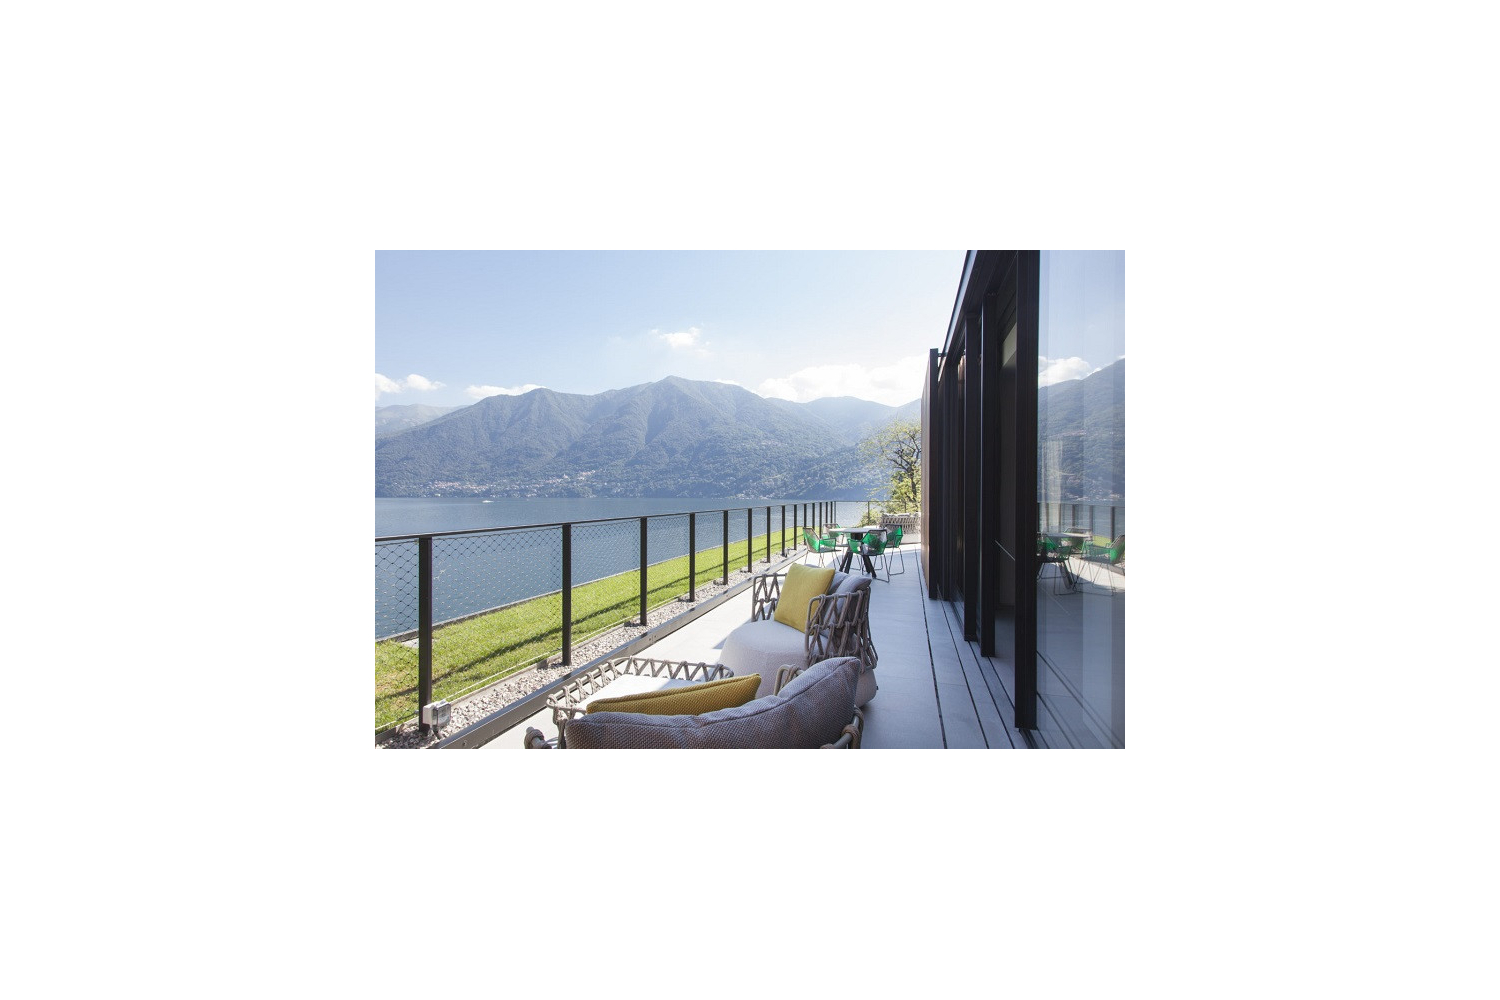 Valmont Spa opens in Italy’s Lake Como